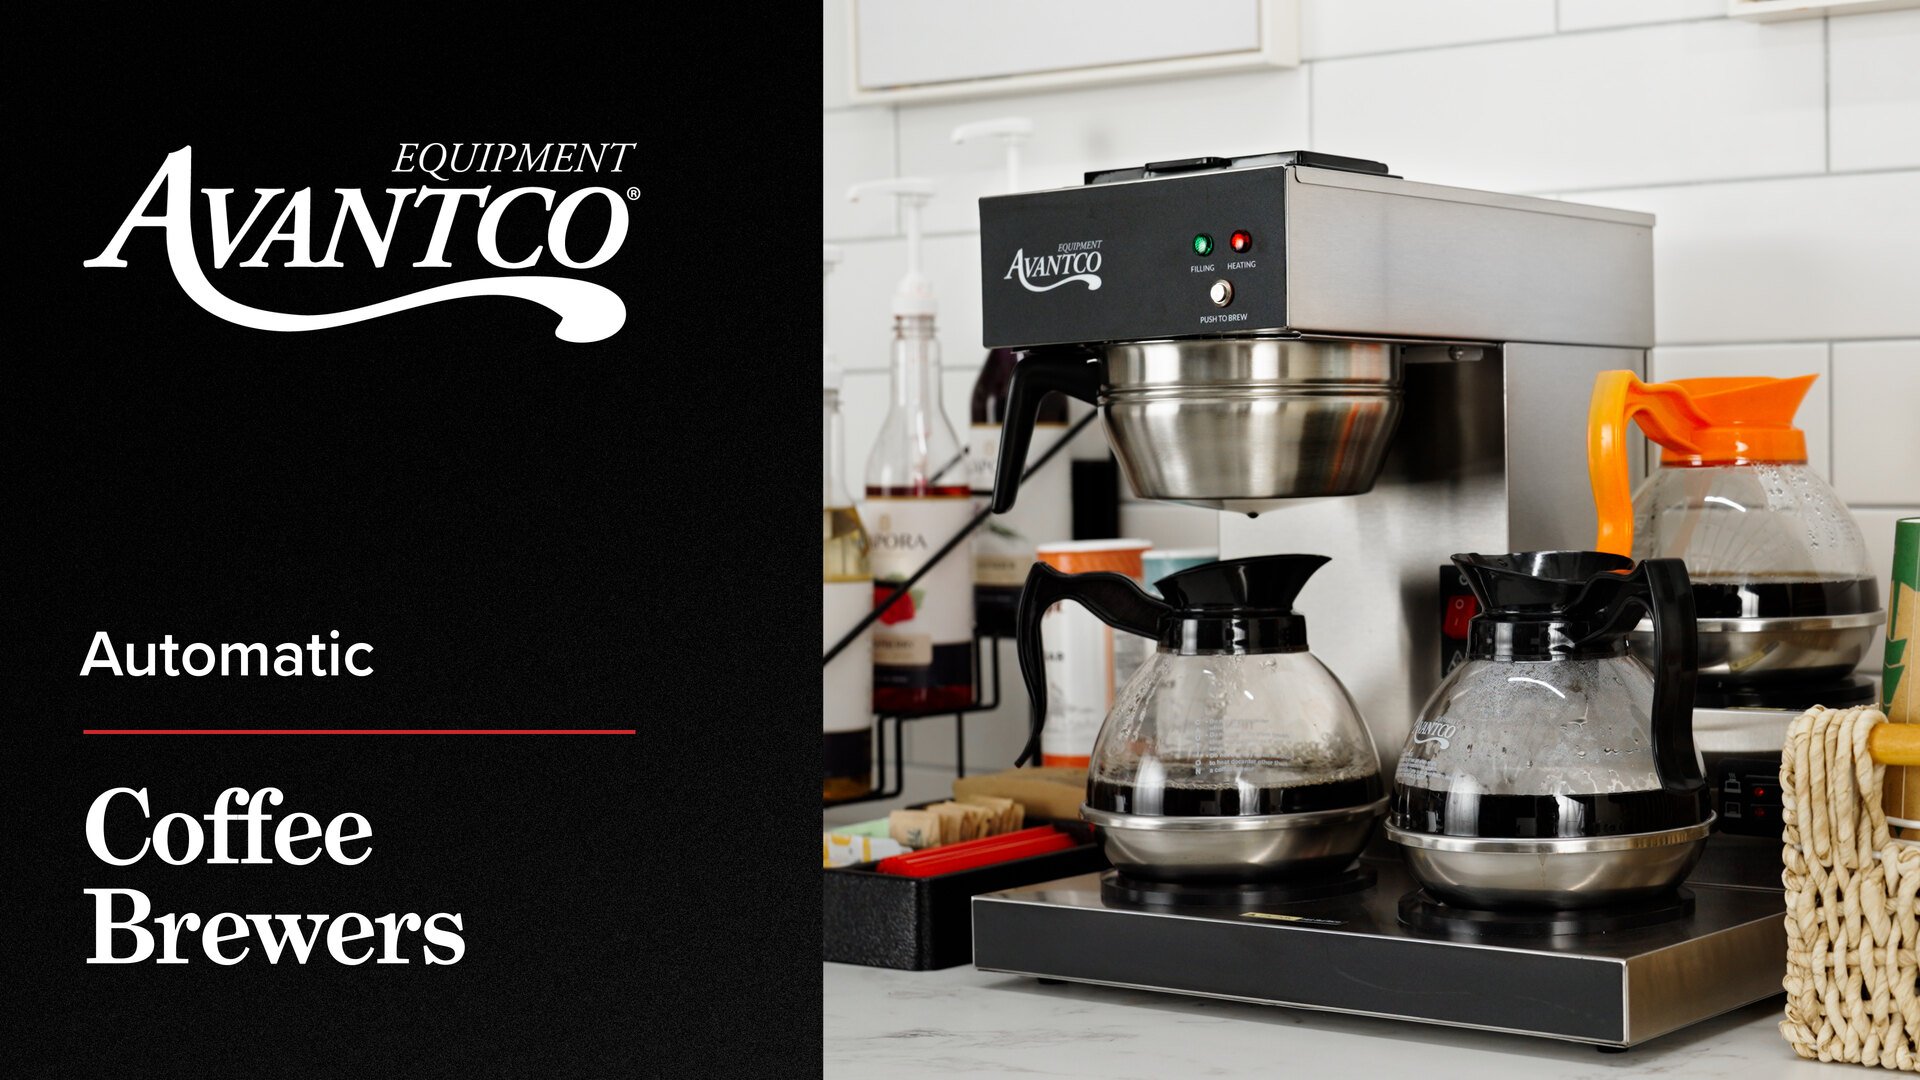 https://www.webstaurantstore.com/images/videos/extra_large/avantco_automatic_coffeebrewers_thumb.jpg